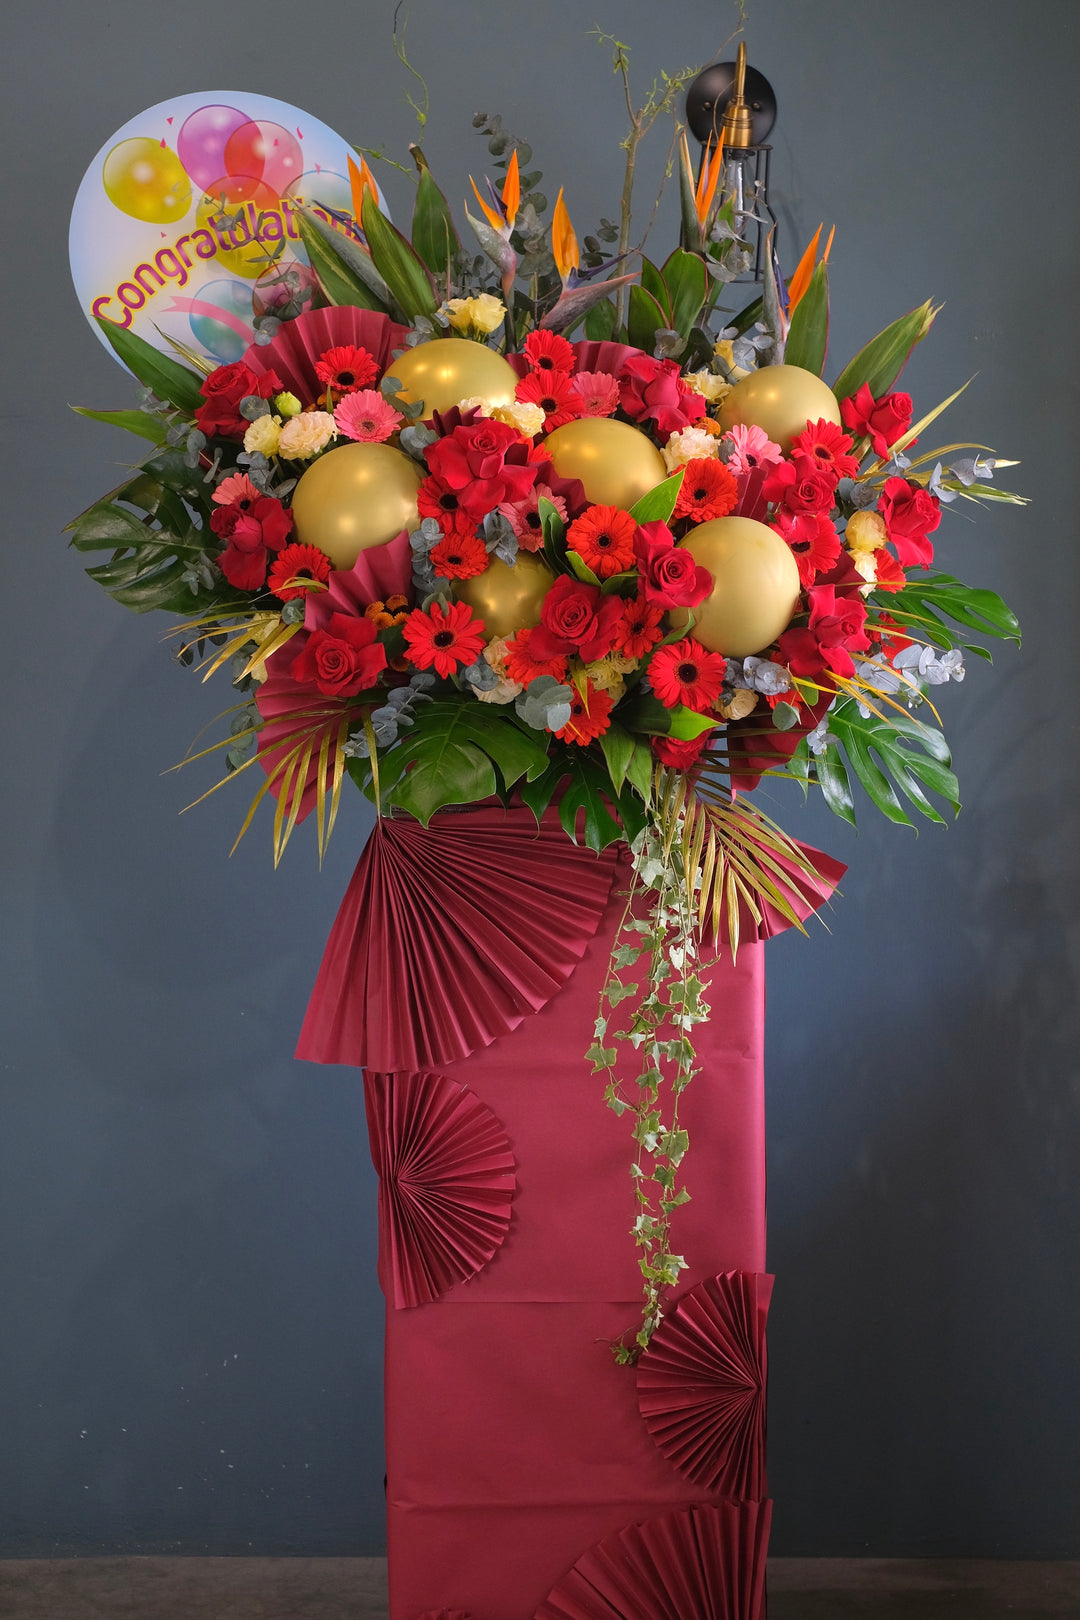 As we frequently dabbles in florist design, styling, curating new designs, here's showcasing our newest grand opening series. For same day grand opening congratulations flowers delivery in Penang and Butterworth.